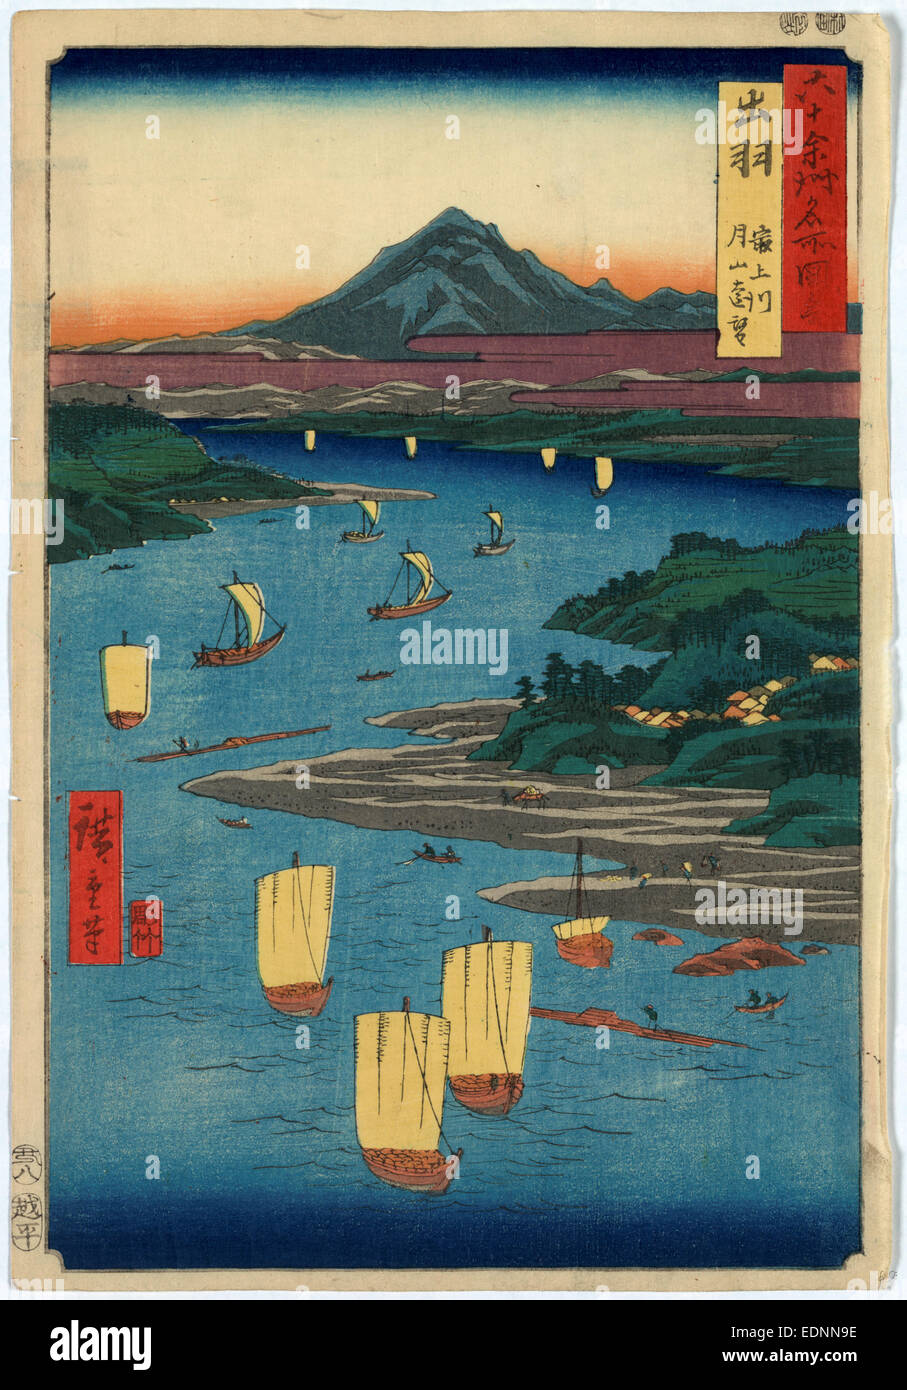 Dewa, mogamigawa, gassan enbo, View of Mogami River and Gassan mountain, Dewa., Ando, Hiroshige, 1797-1858, artist, 1853., 1 print : woodcut, color ; 36.2 x 24.7 cm., Print shows a bird's-eye view of sailboats on the Mogami River, with Gassan Mountain in the distance, at sunset. Stock Photo